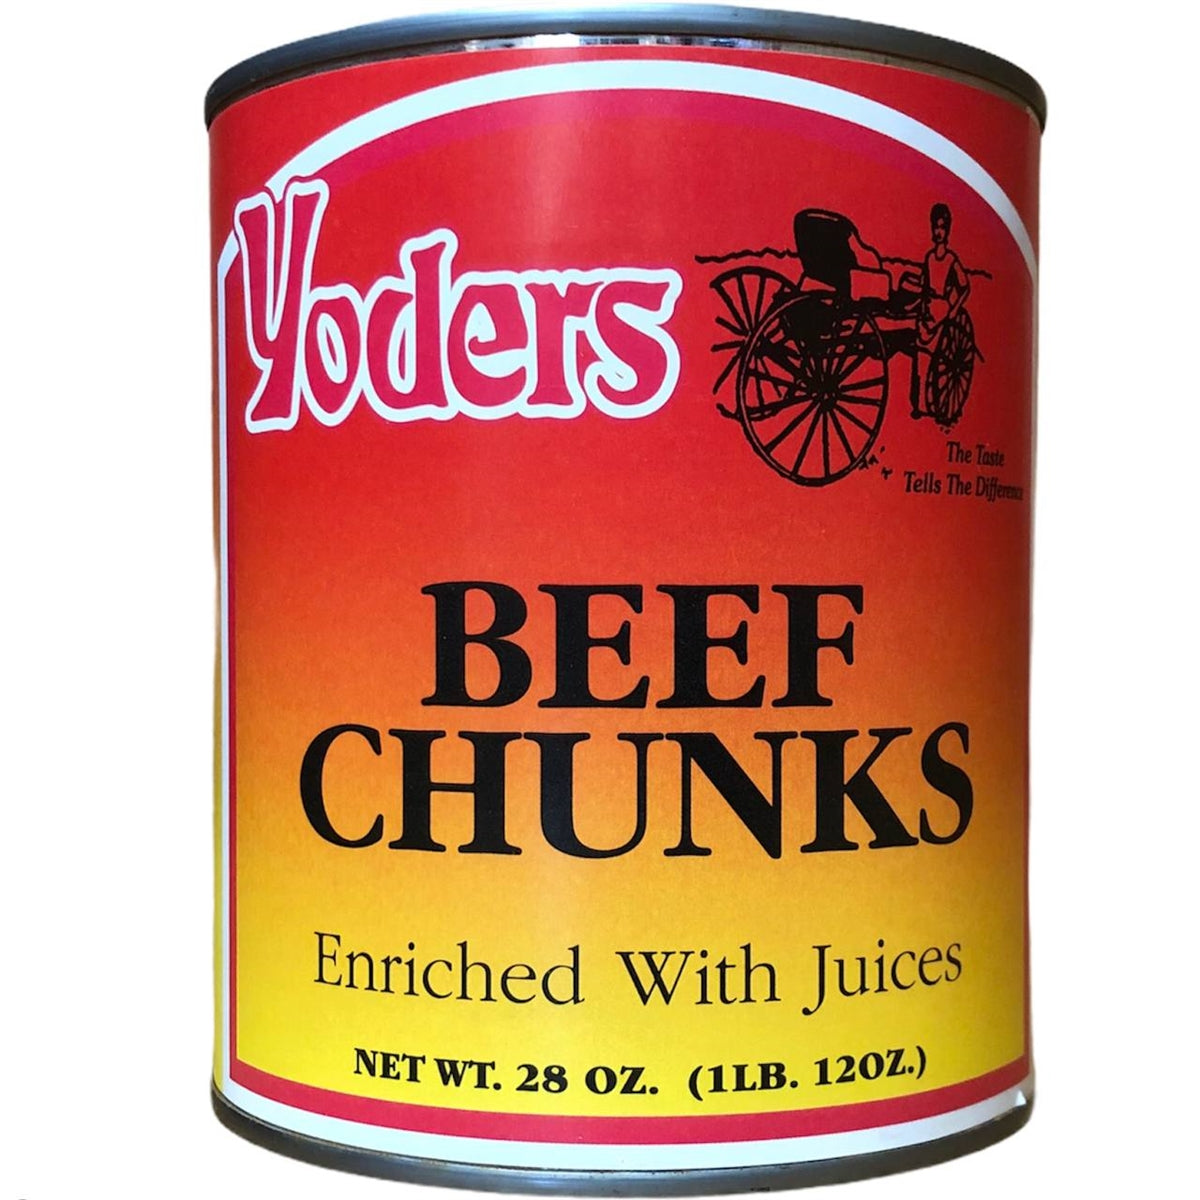 Case (12 Cans) of Yoder's fresh REAL Canned Beef Chunks